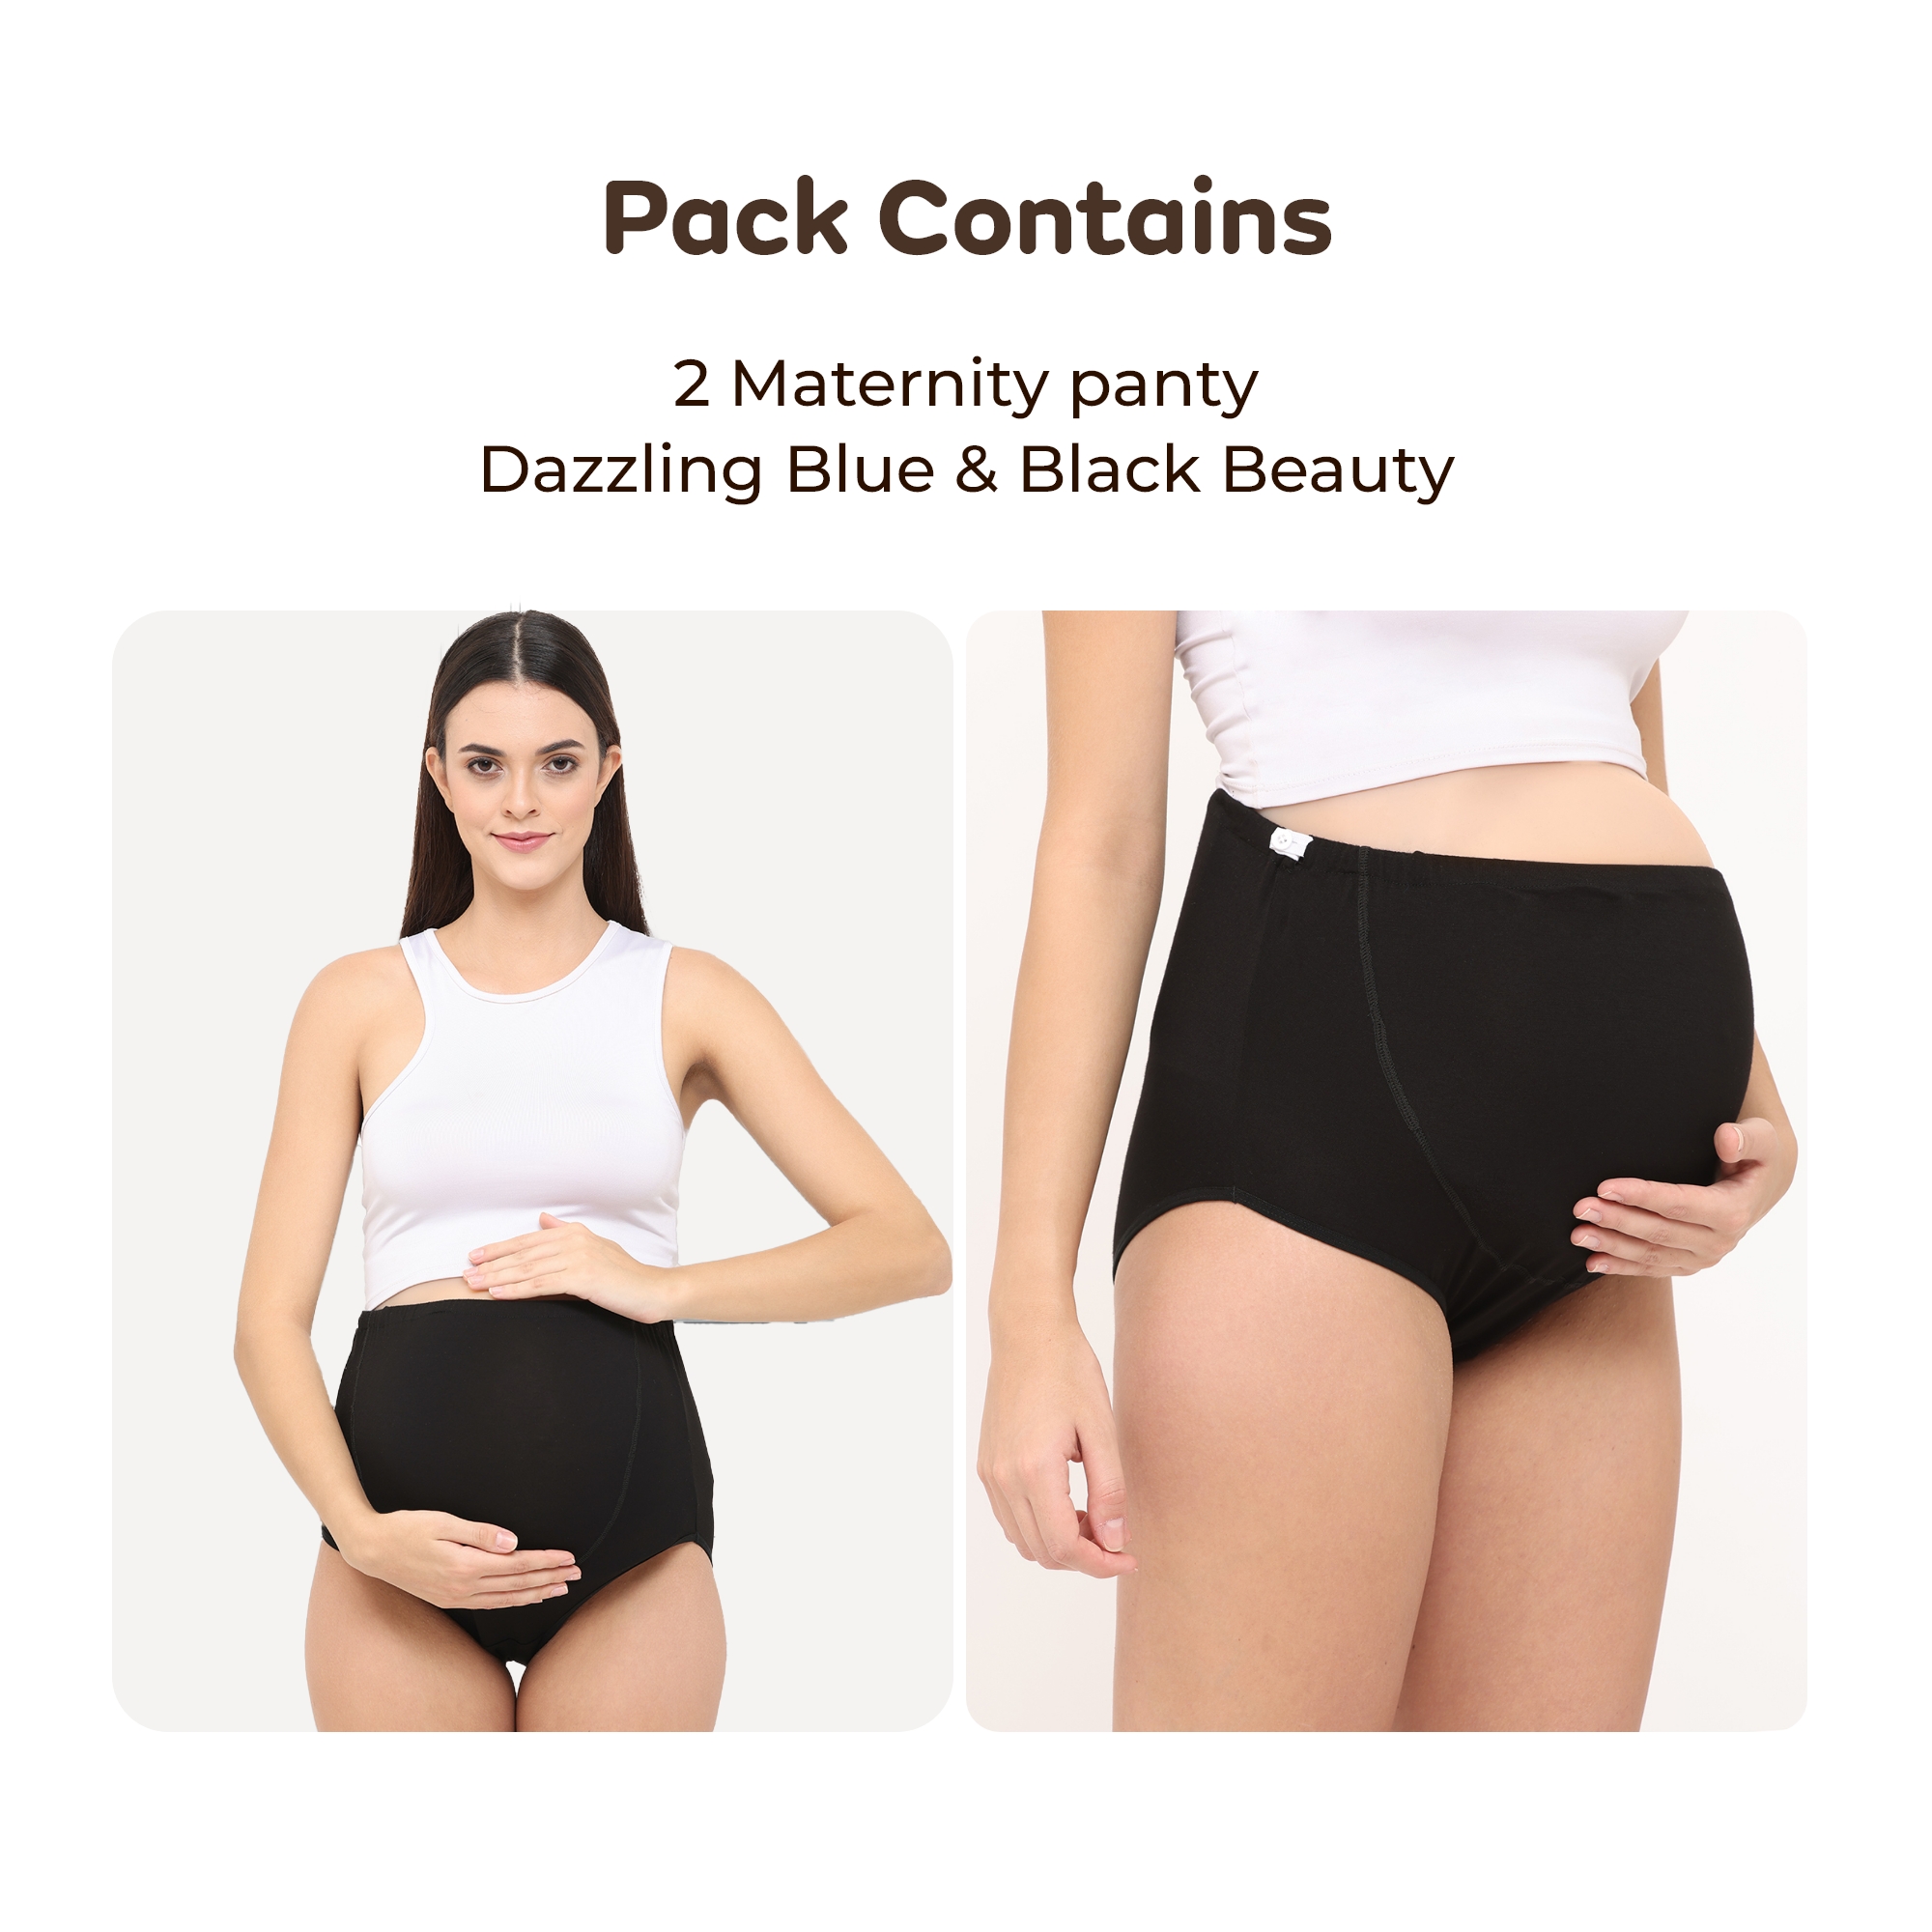 Pregnant Women's Maternity Supportive Panties, Set Of 3 (black